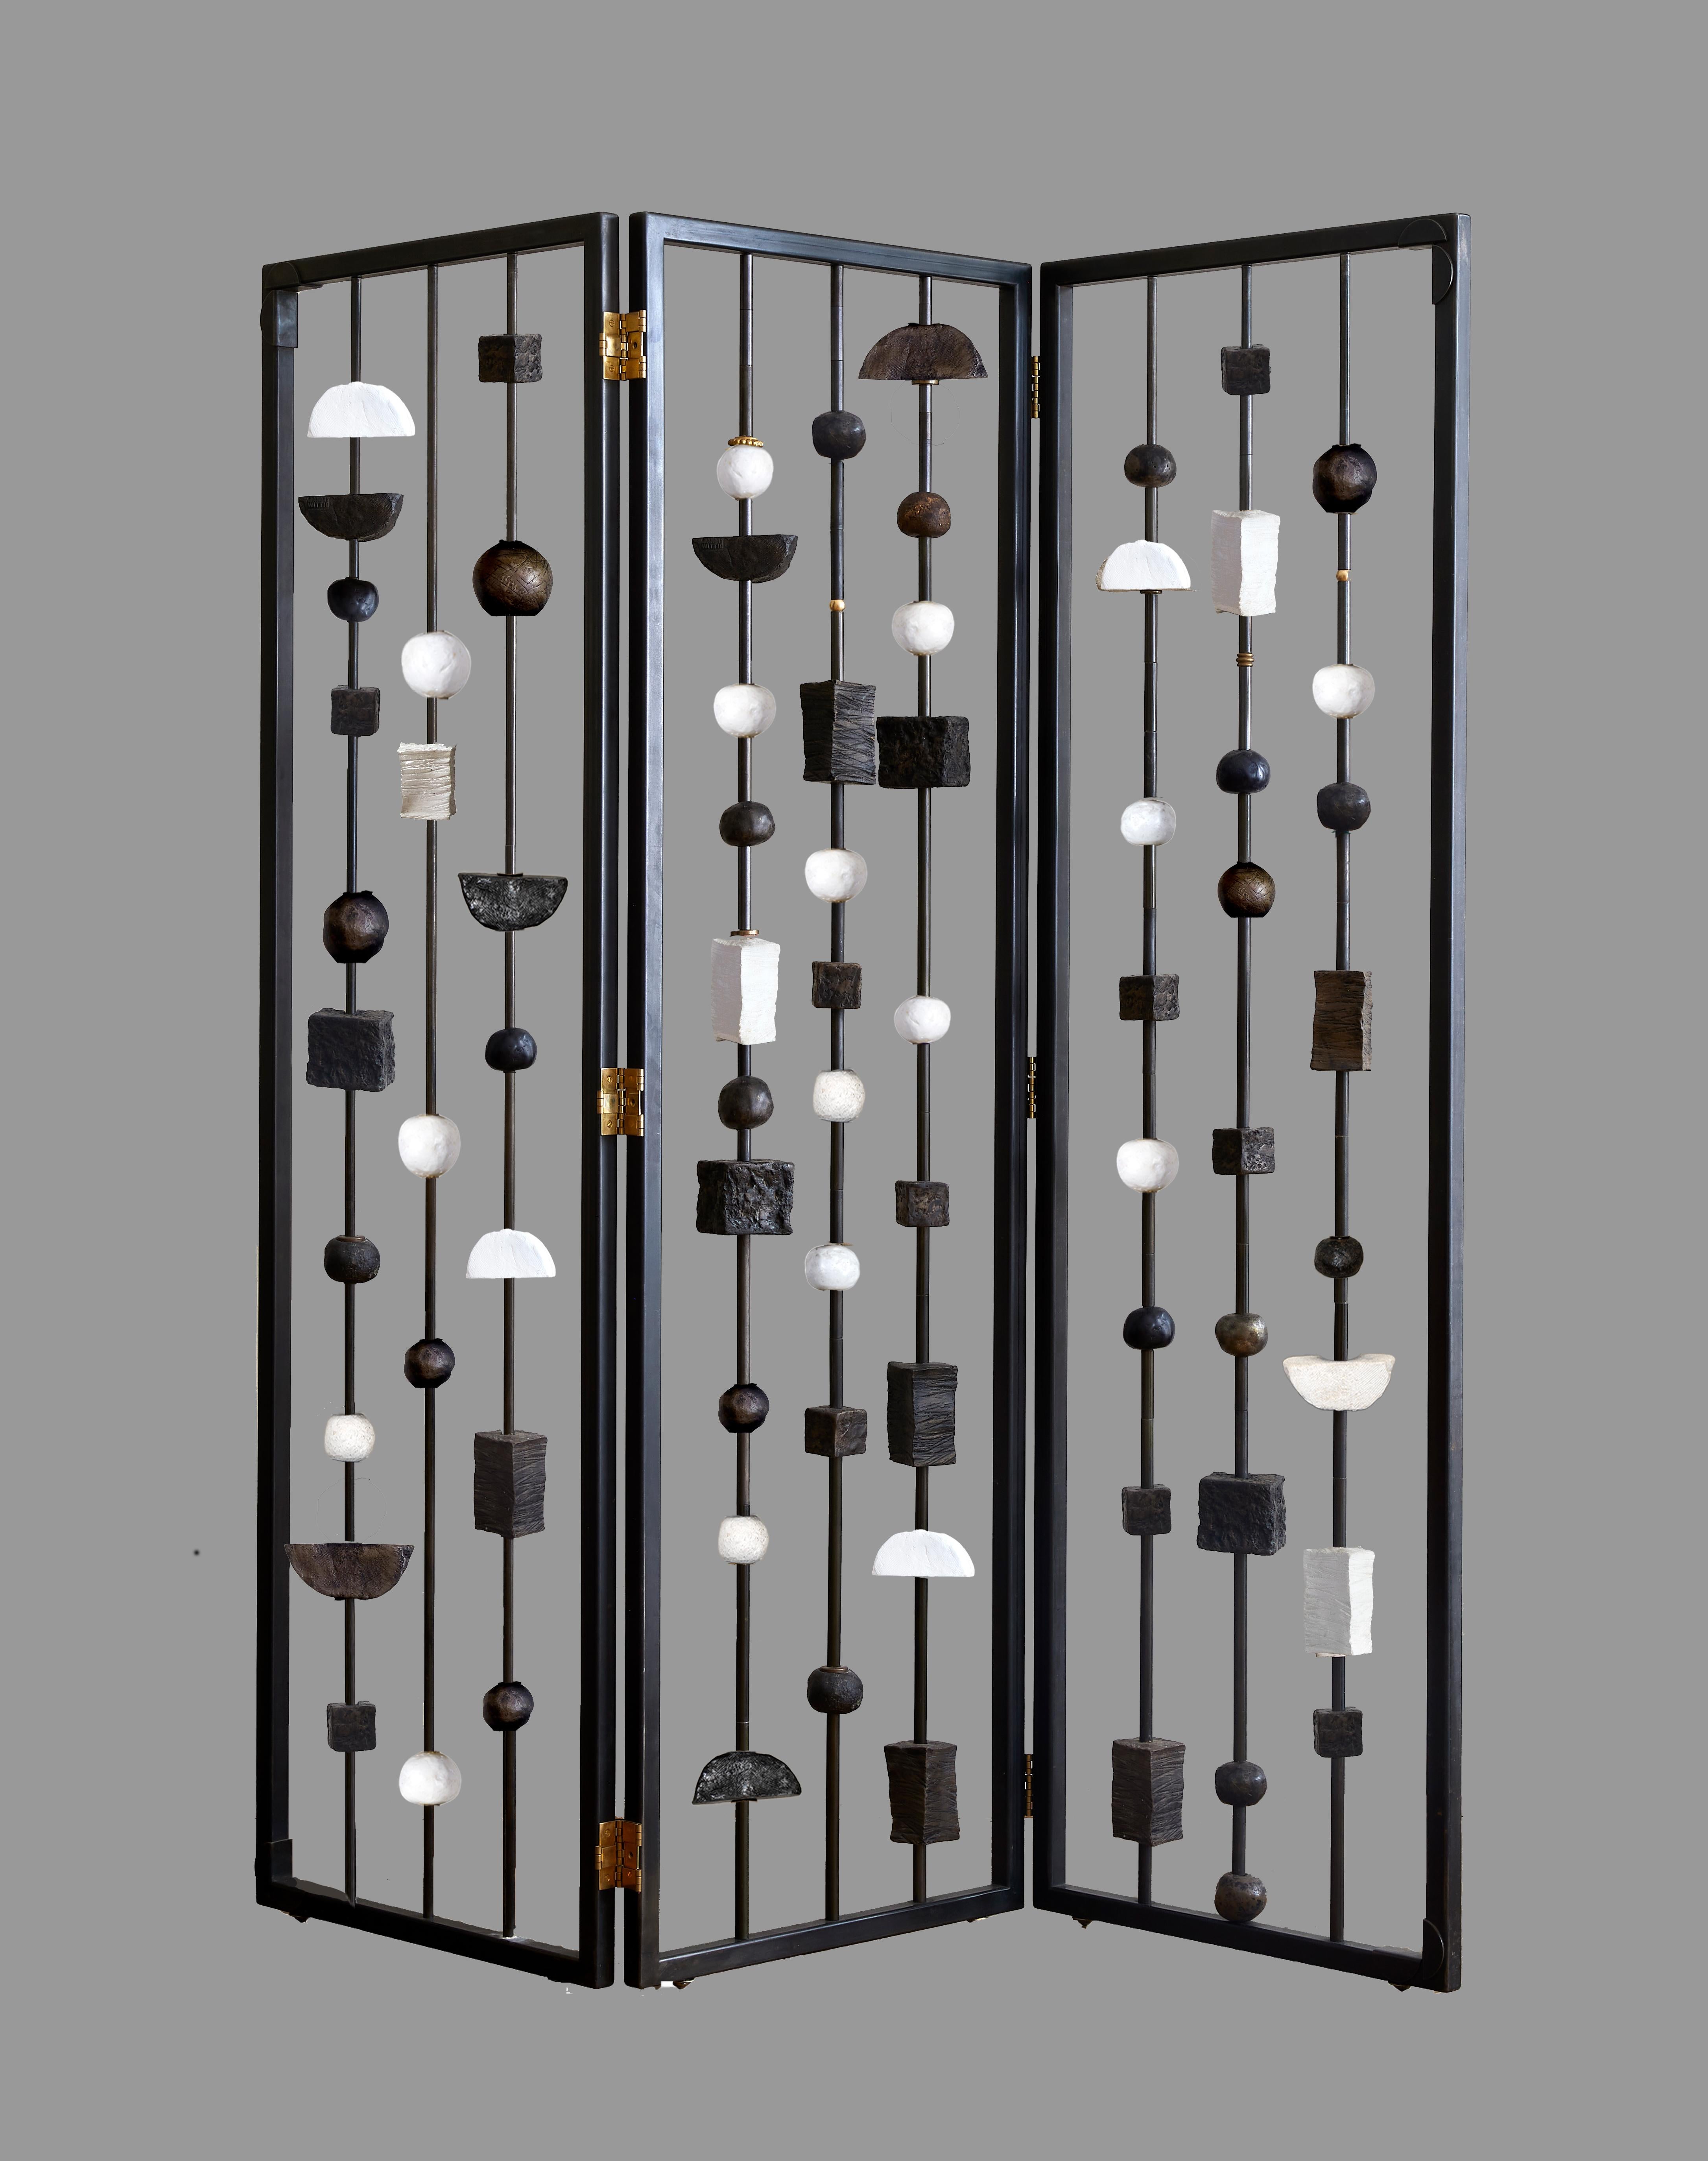 Margit Wittig's triptych blackened metal screen/ room divider features hand-crafted sculptural elements . These pieces can rotate allowing the collector to create varying levels of opaqueness and look of the divider spanning the gamit from full